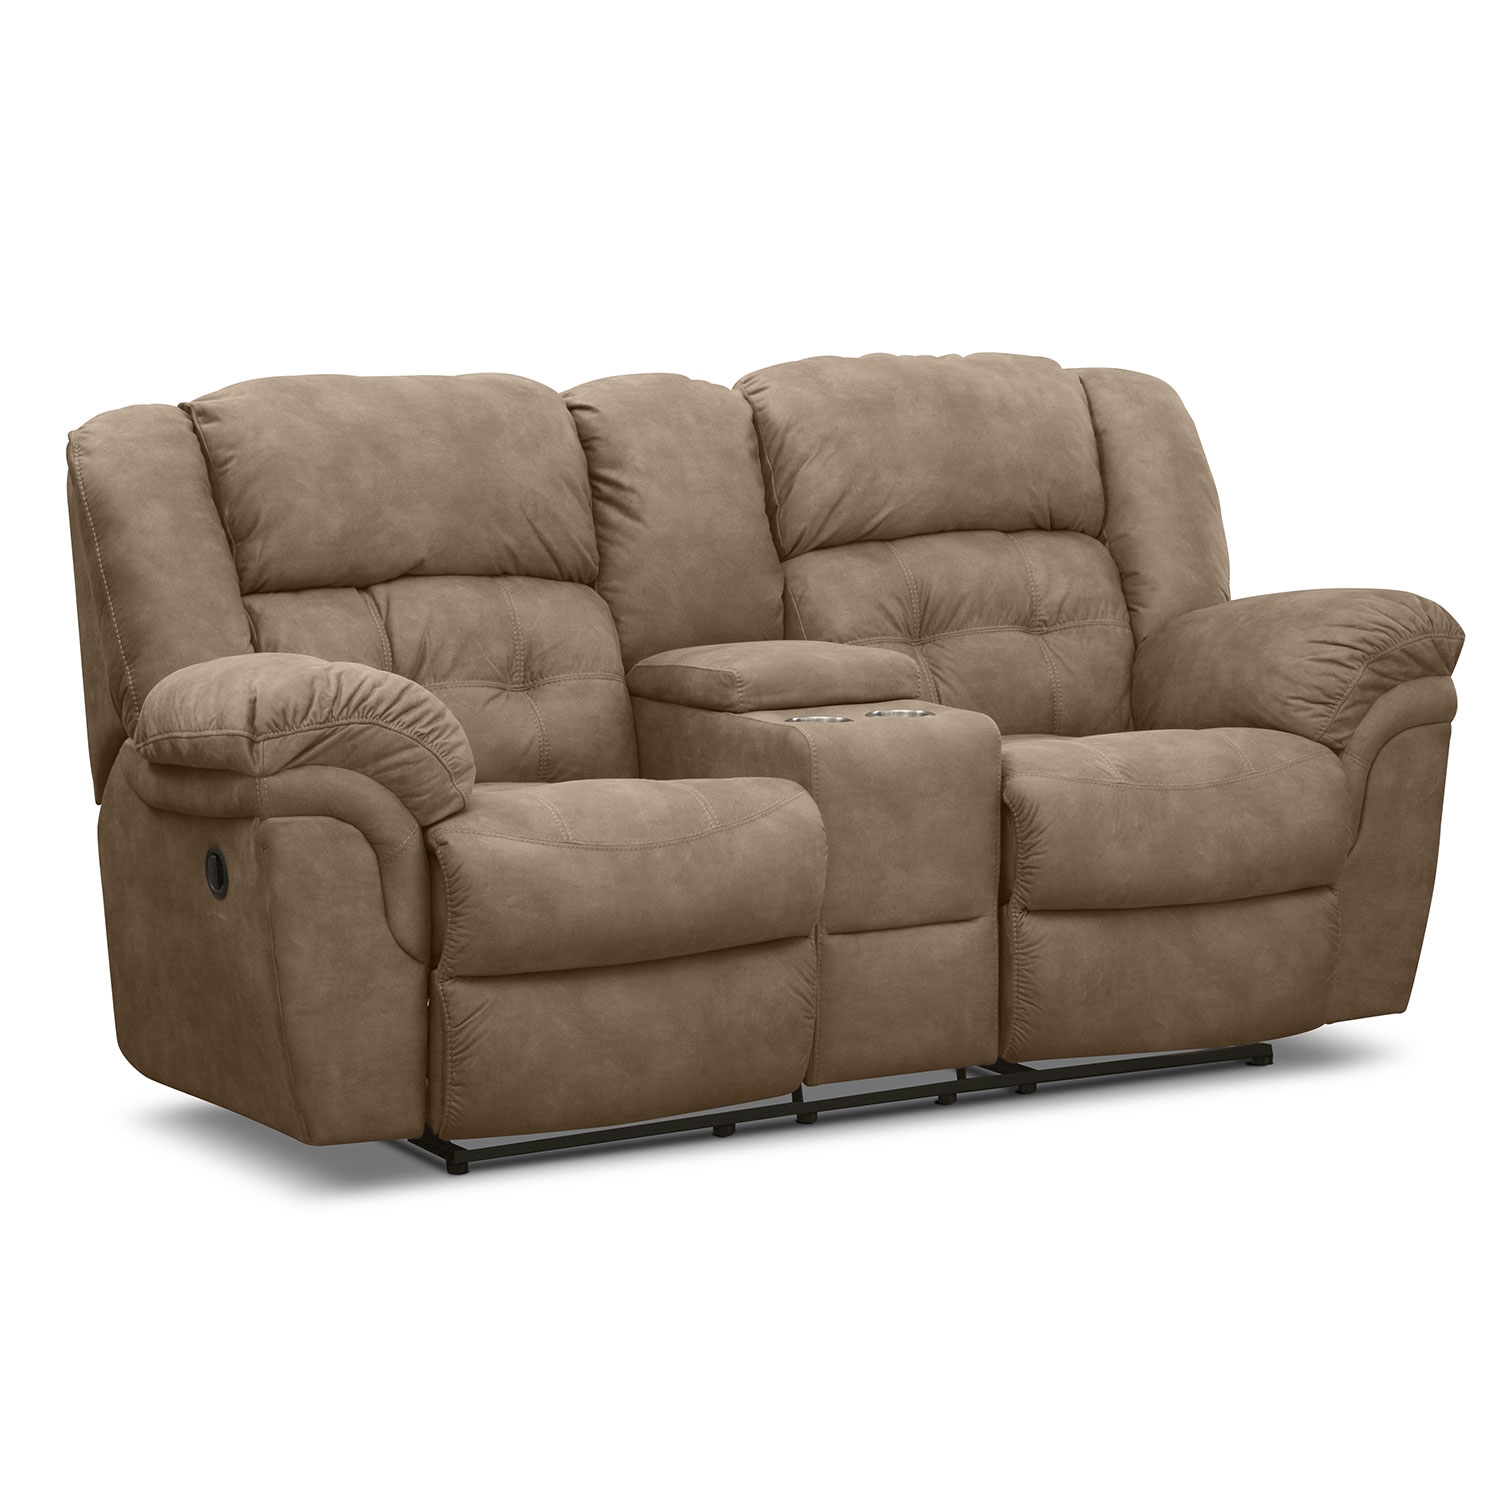 Microfiber Reclining Loveseat With Console: Minimizing Your Worries One At A Time